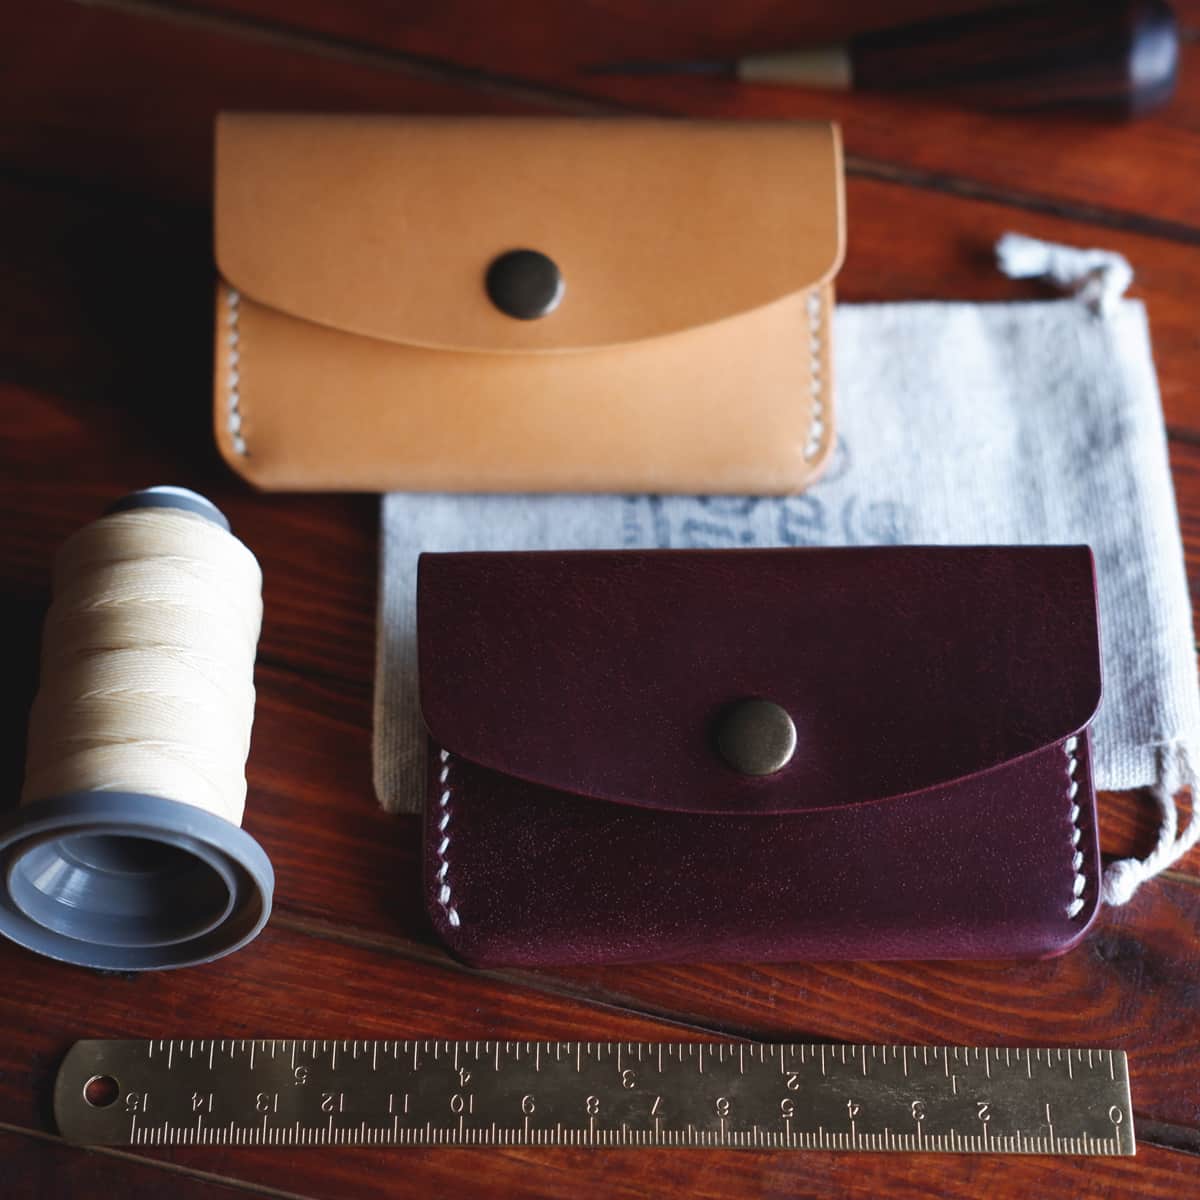 The Mountain Snap Wallets in Burgundy and Natural leathers